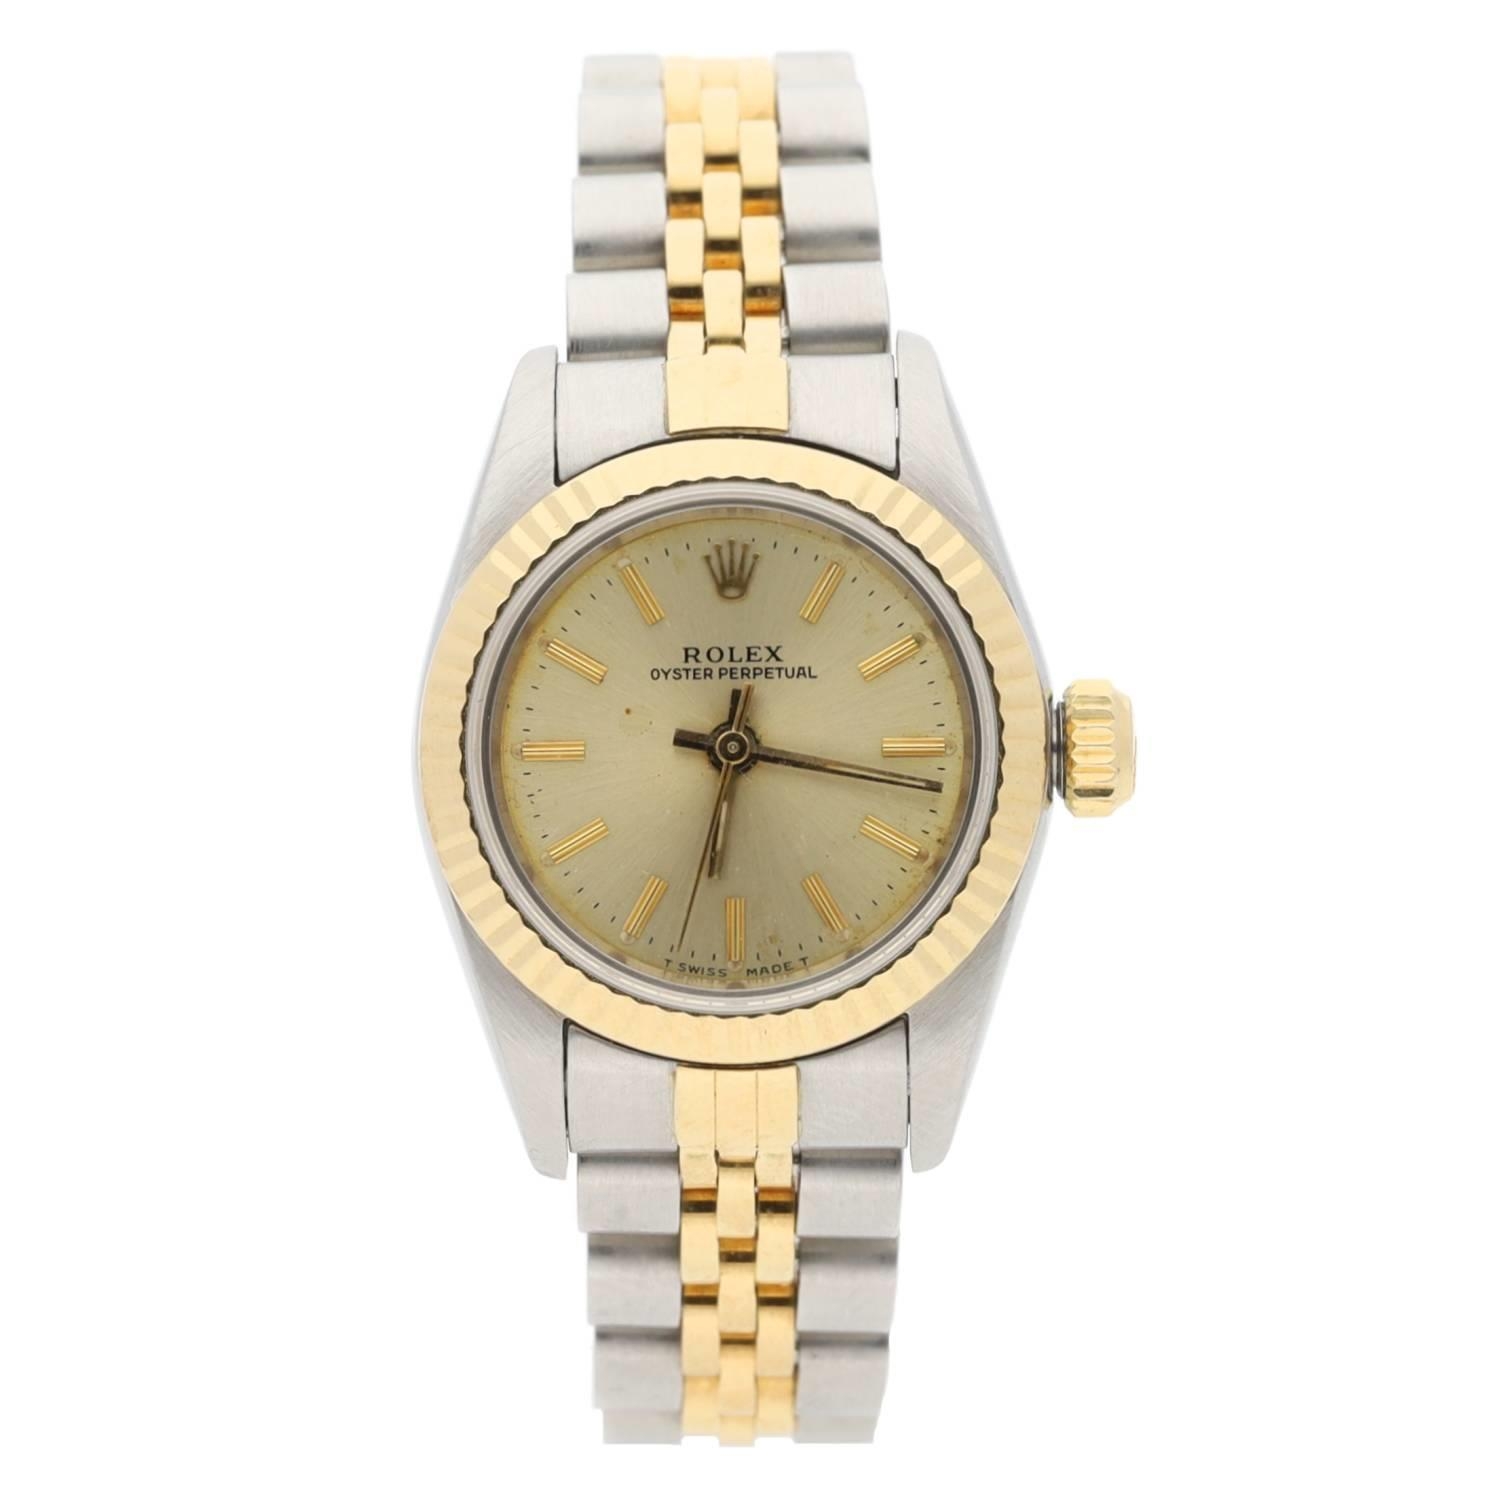 Rolex Oyster Perpetual gold and stainless steel lady's wristwatch, reference no. 67193, serial no.